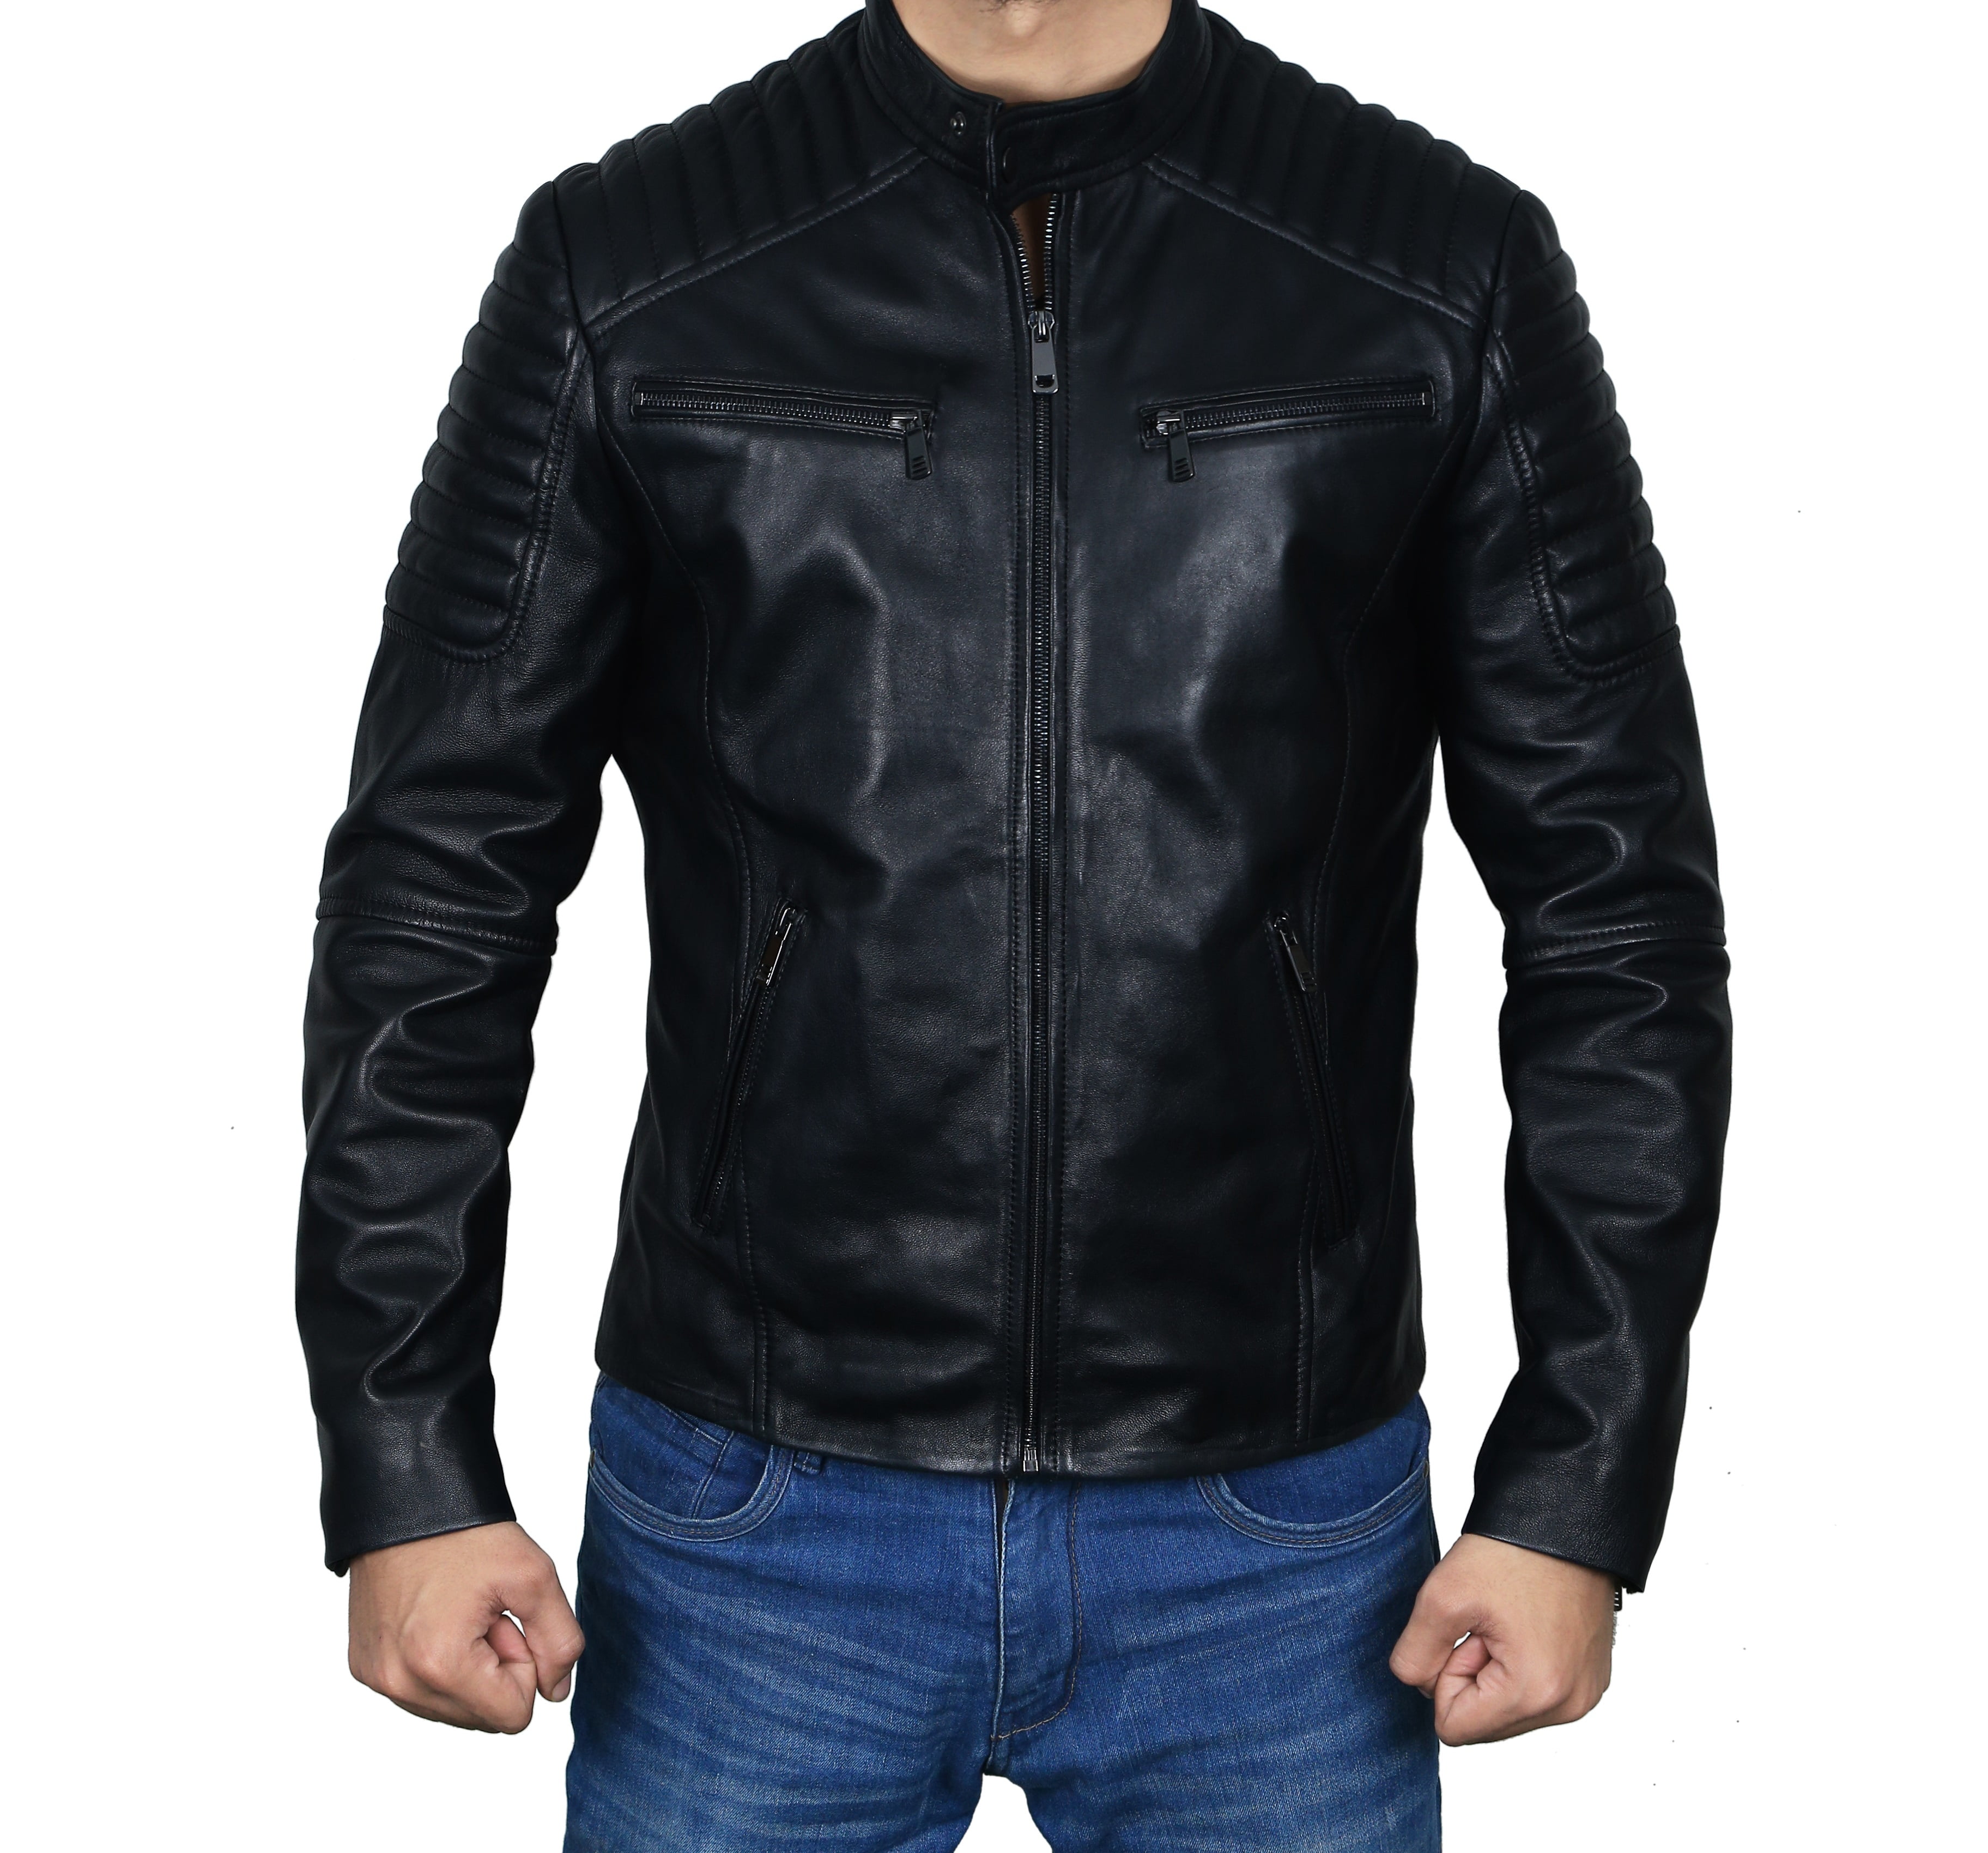 Men Black Real Leather Jacket with Quilted Shoulders - Walmart.com